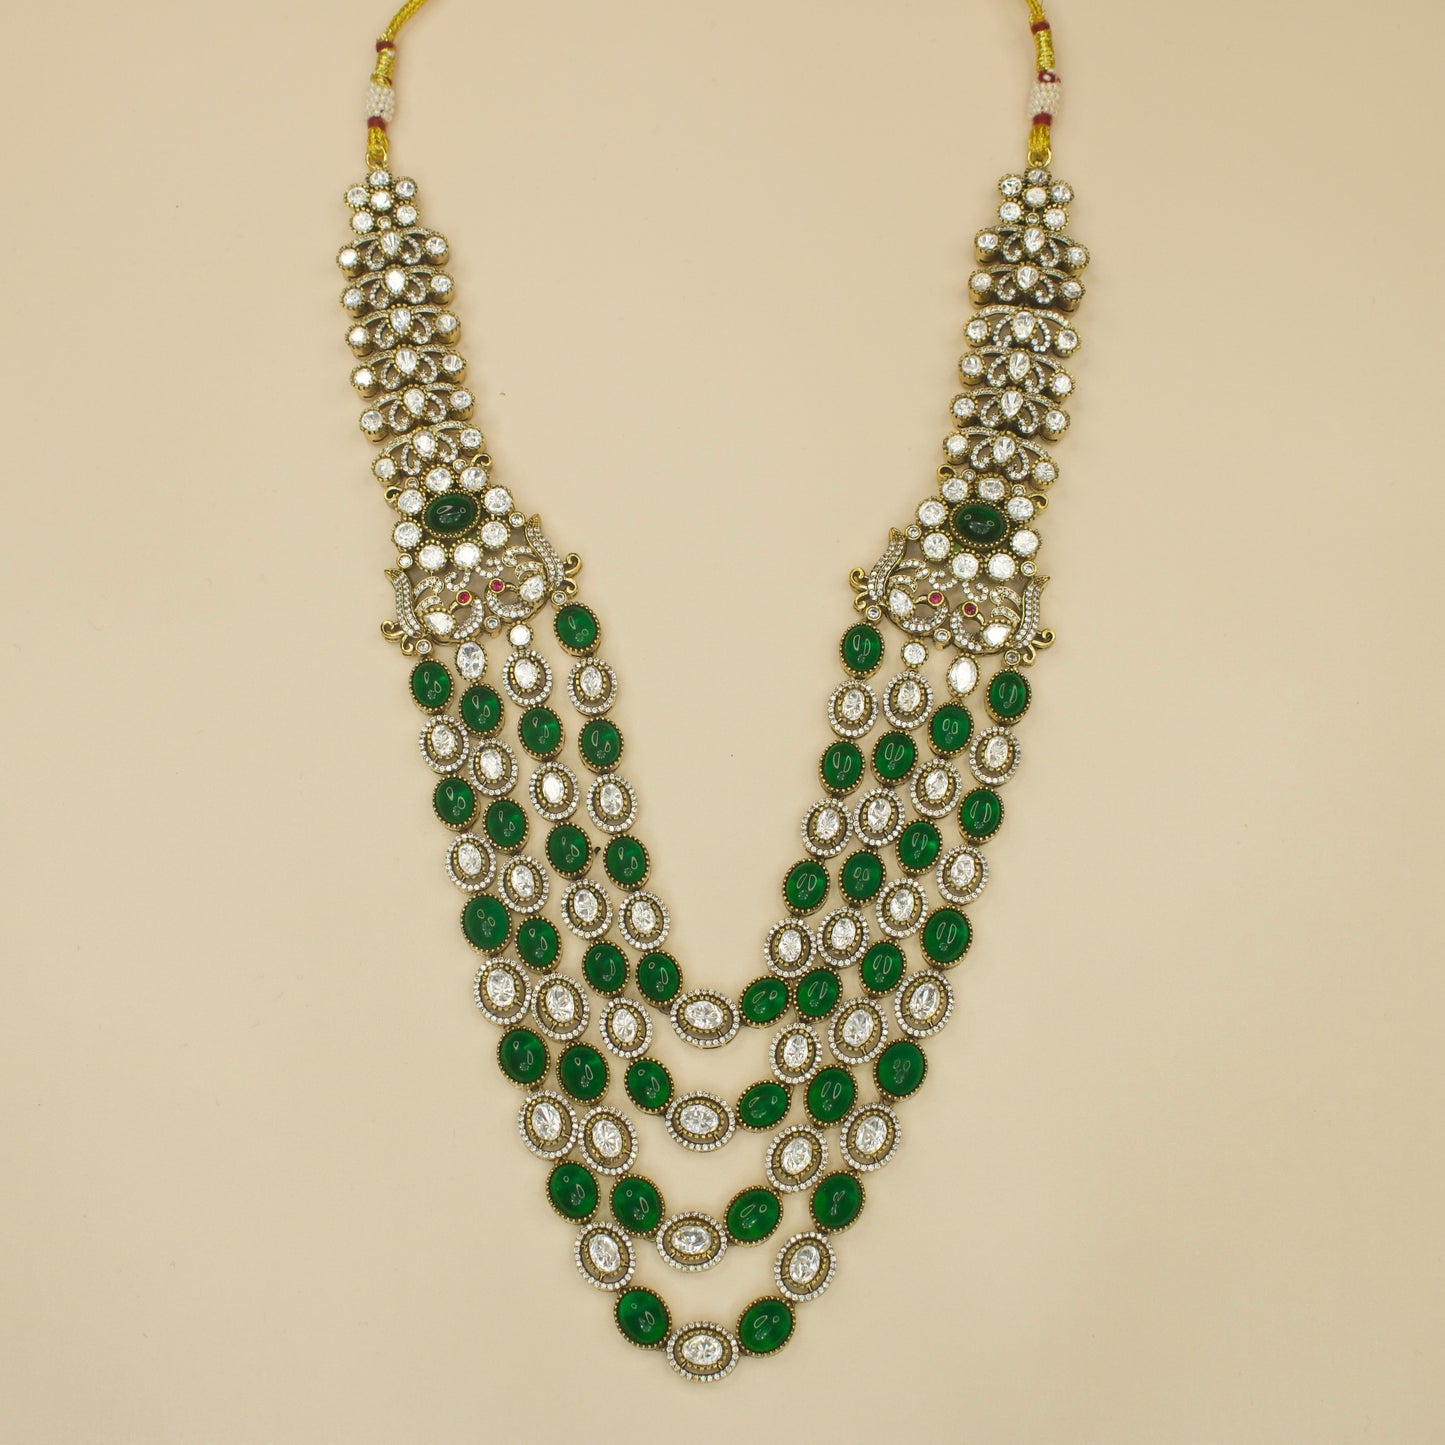 Classic Victorian Layered Necklace Set with peacock motifs